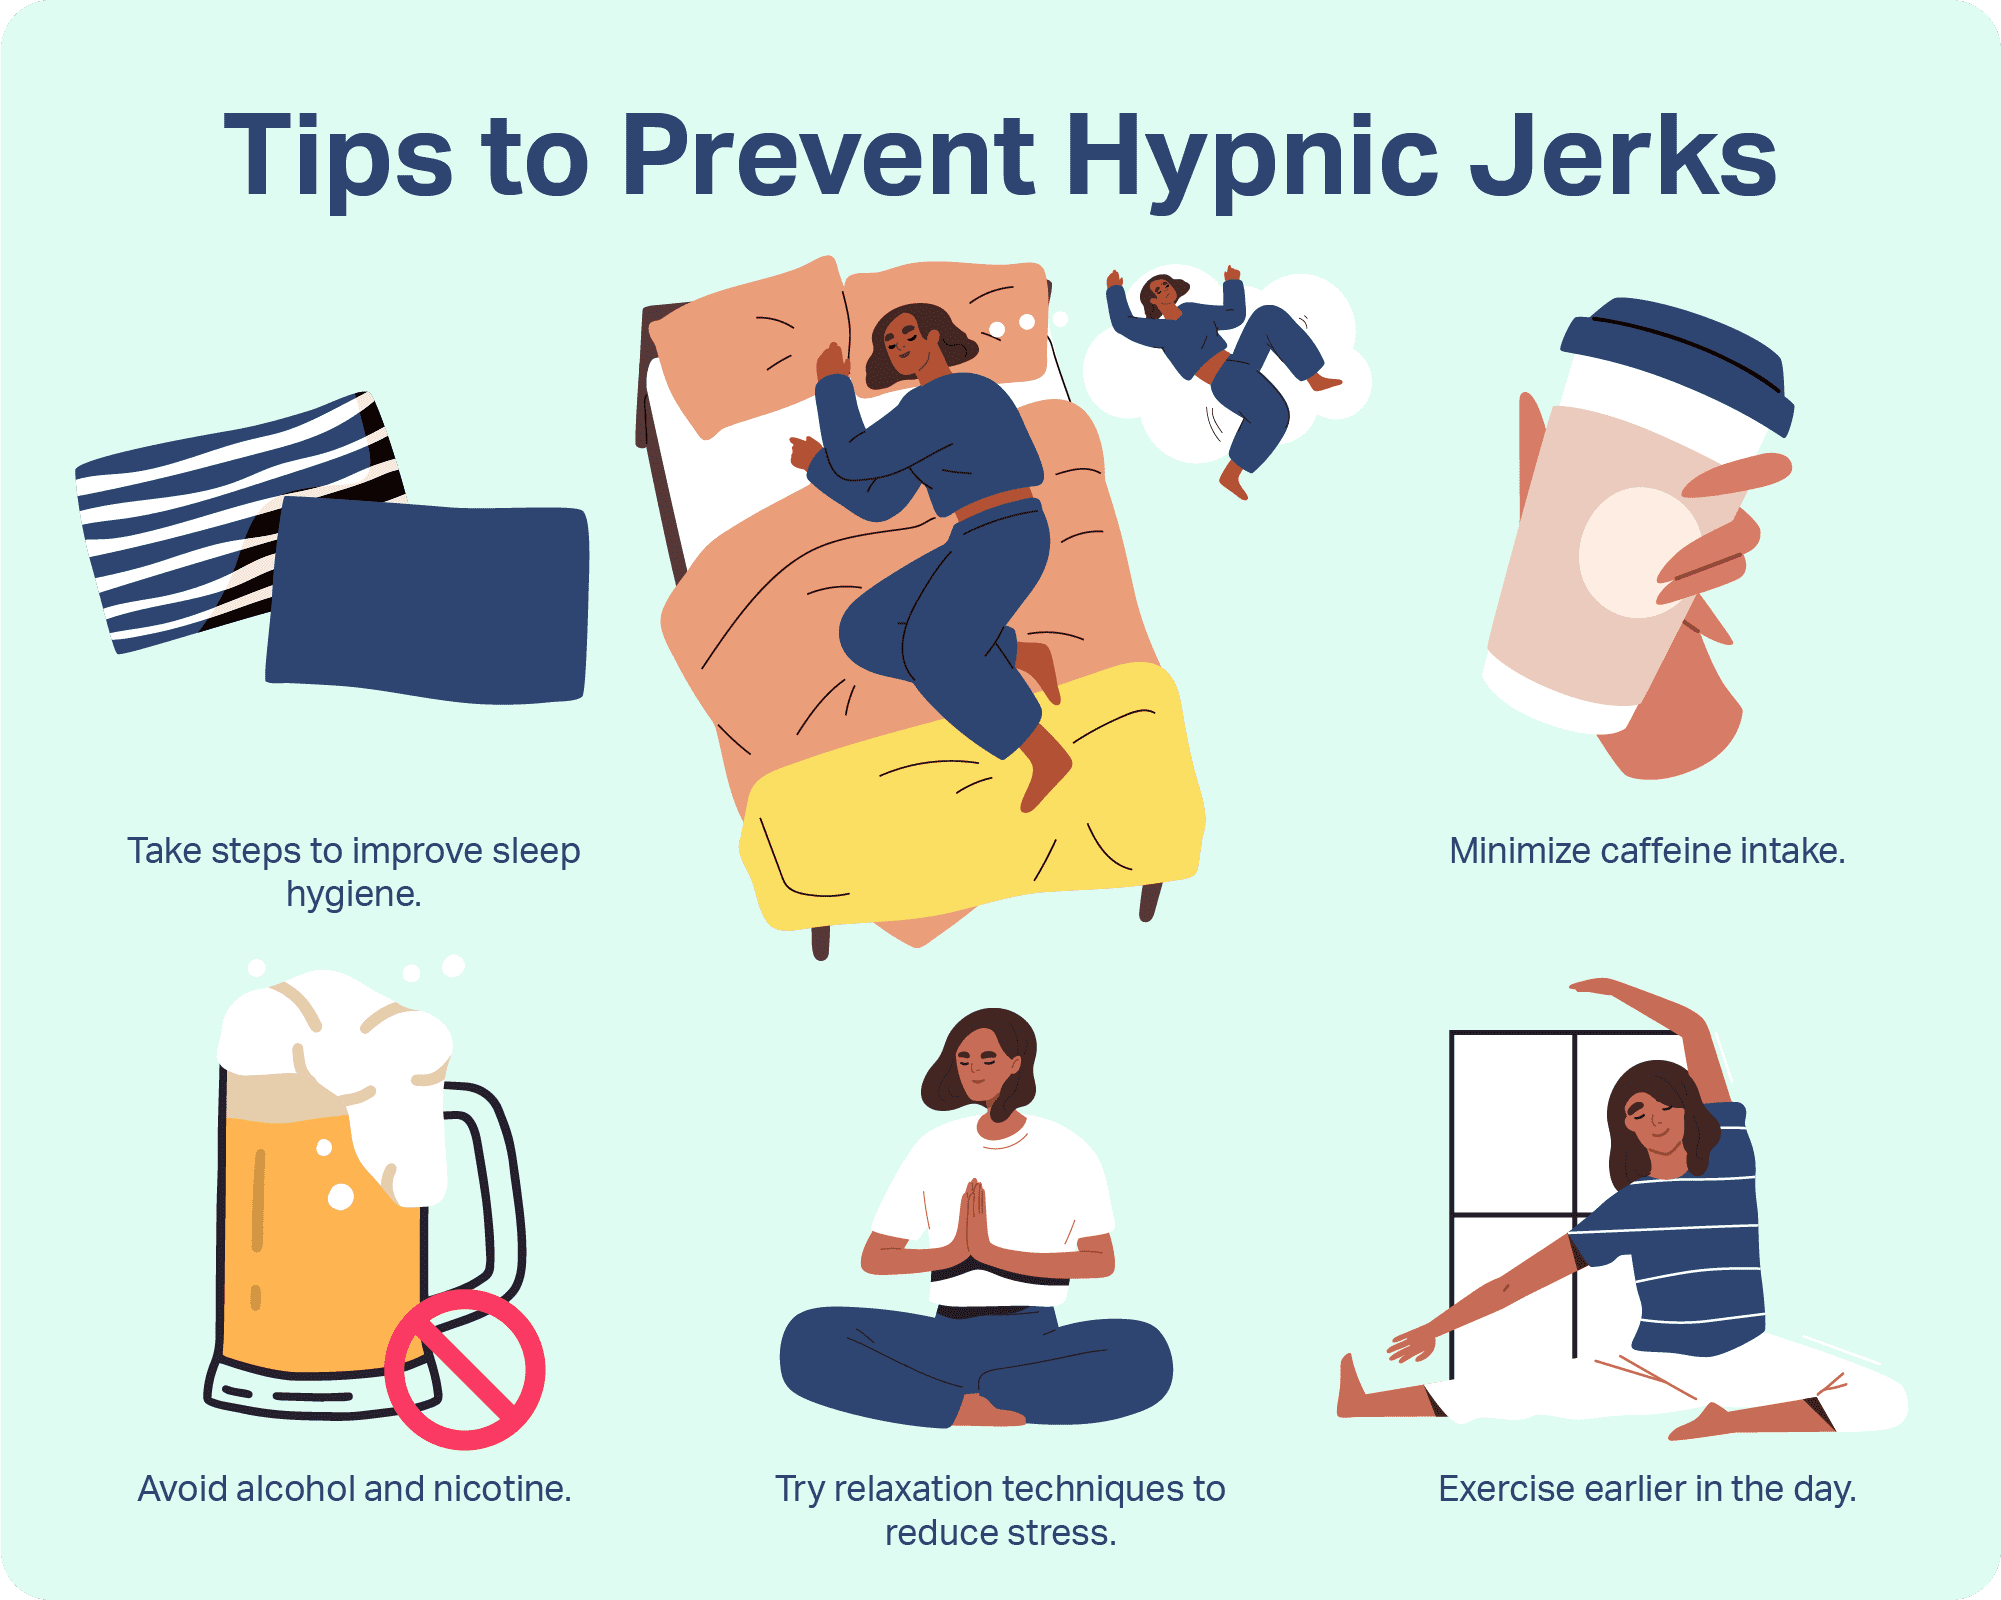 Tips to Prevent Hypnic Jerks